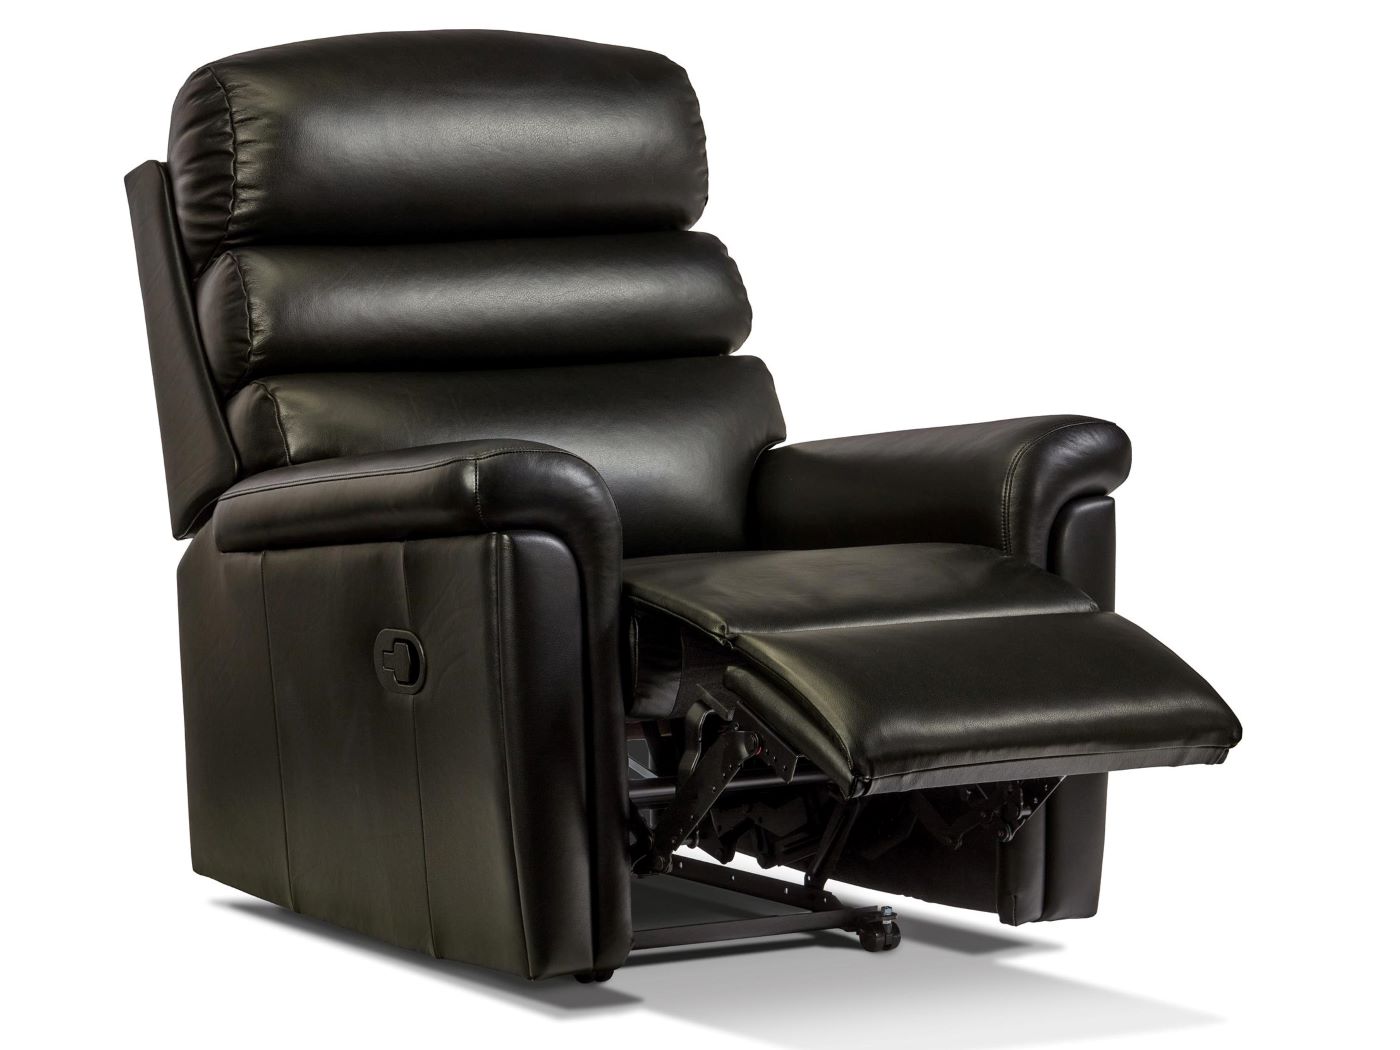 Corfu Small recliner chair leather